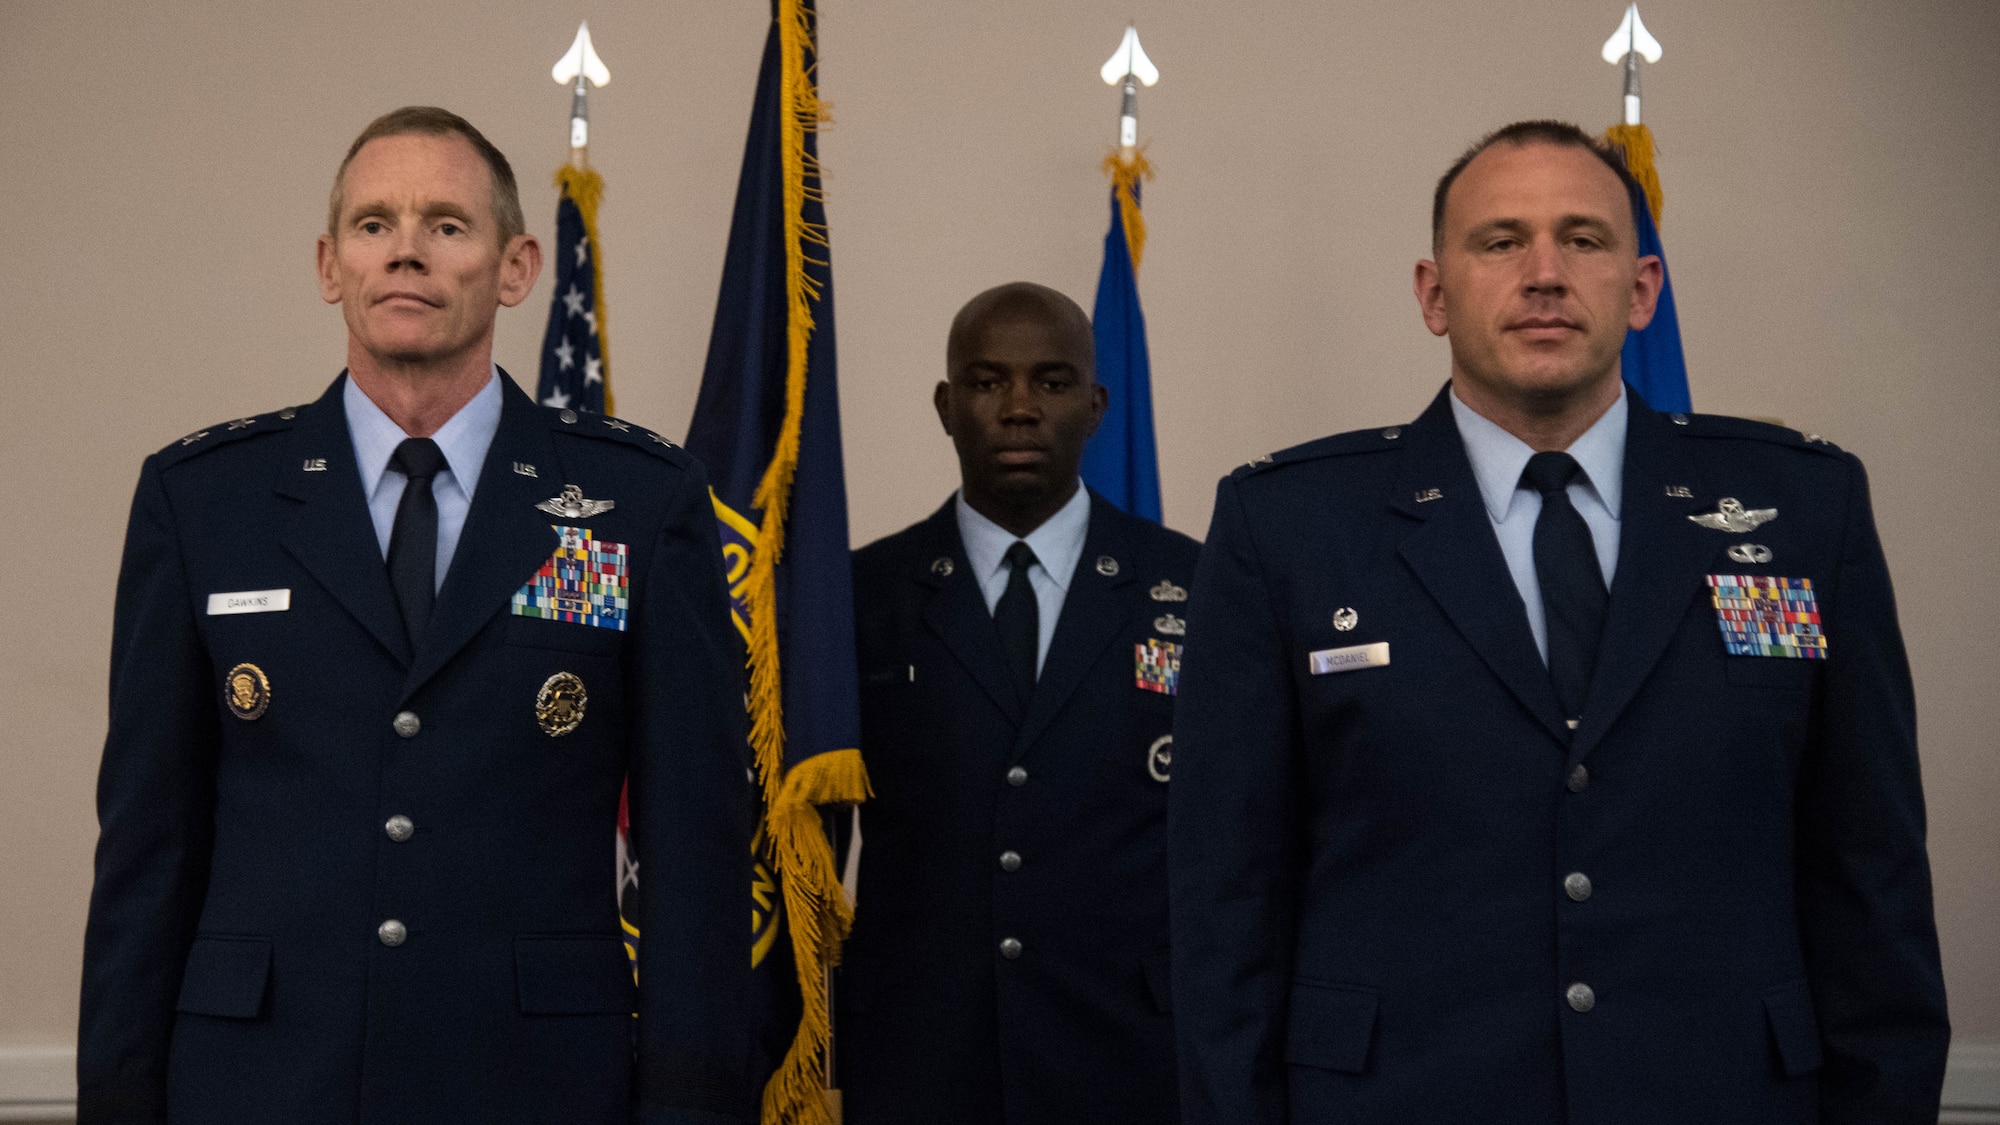 Maj. Gen. James C. Dawkins Jr., left, 8th Air Force and J-GSOC commander, and Col. Matthew W. McDaniel, right, Standoff Munitions Application Center commander, stand at attention during an assumption of command ceremony at Barksdale Air Force Base, Louisiana, August 9, 2019. The SMAC is an integrated initiative in charge of building up standoff weapon capabilities across the Department of Defense. (U.S. Air Force photo by Airman Jacob B. Wrightsman)